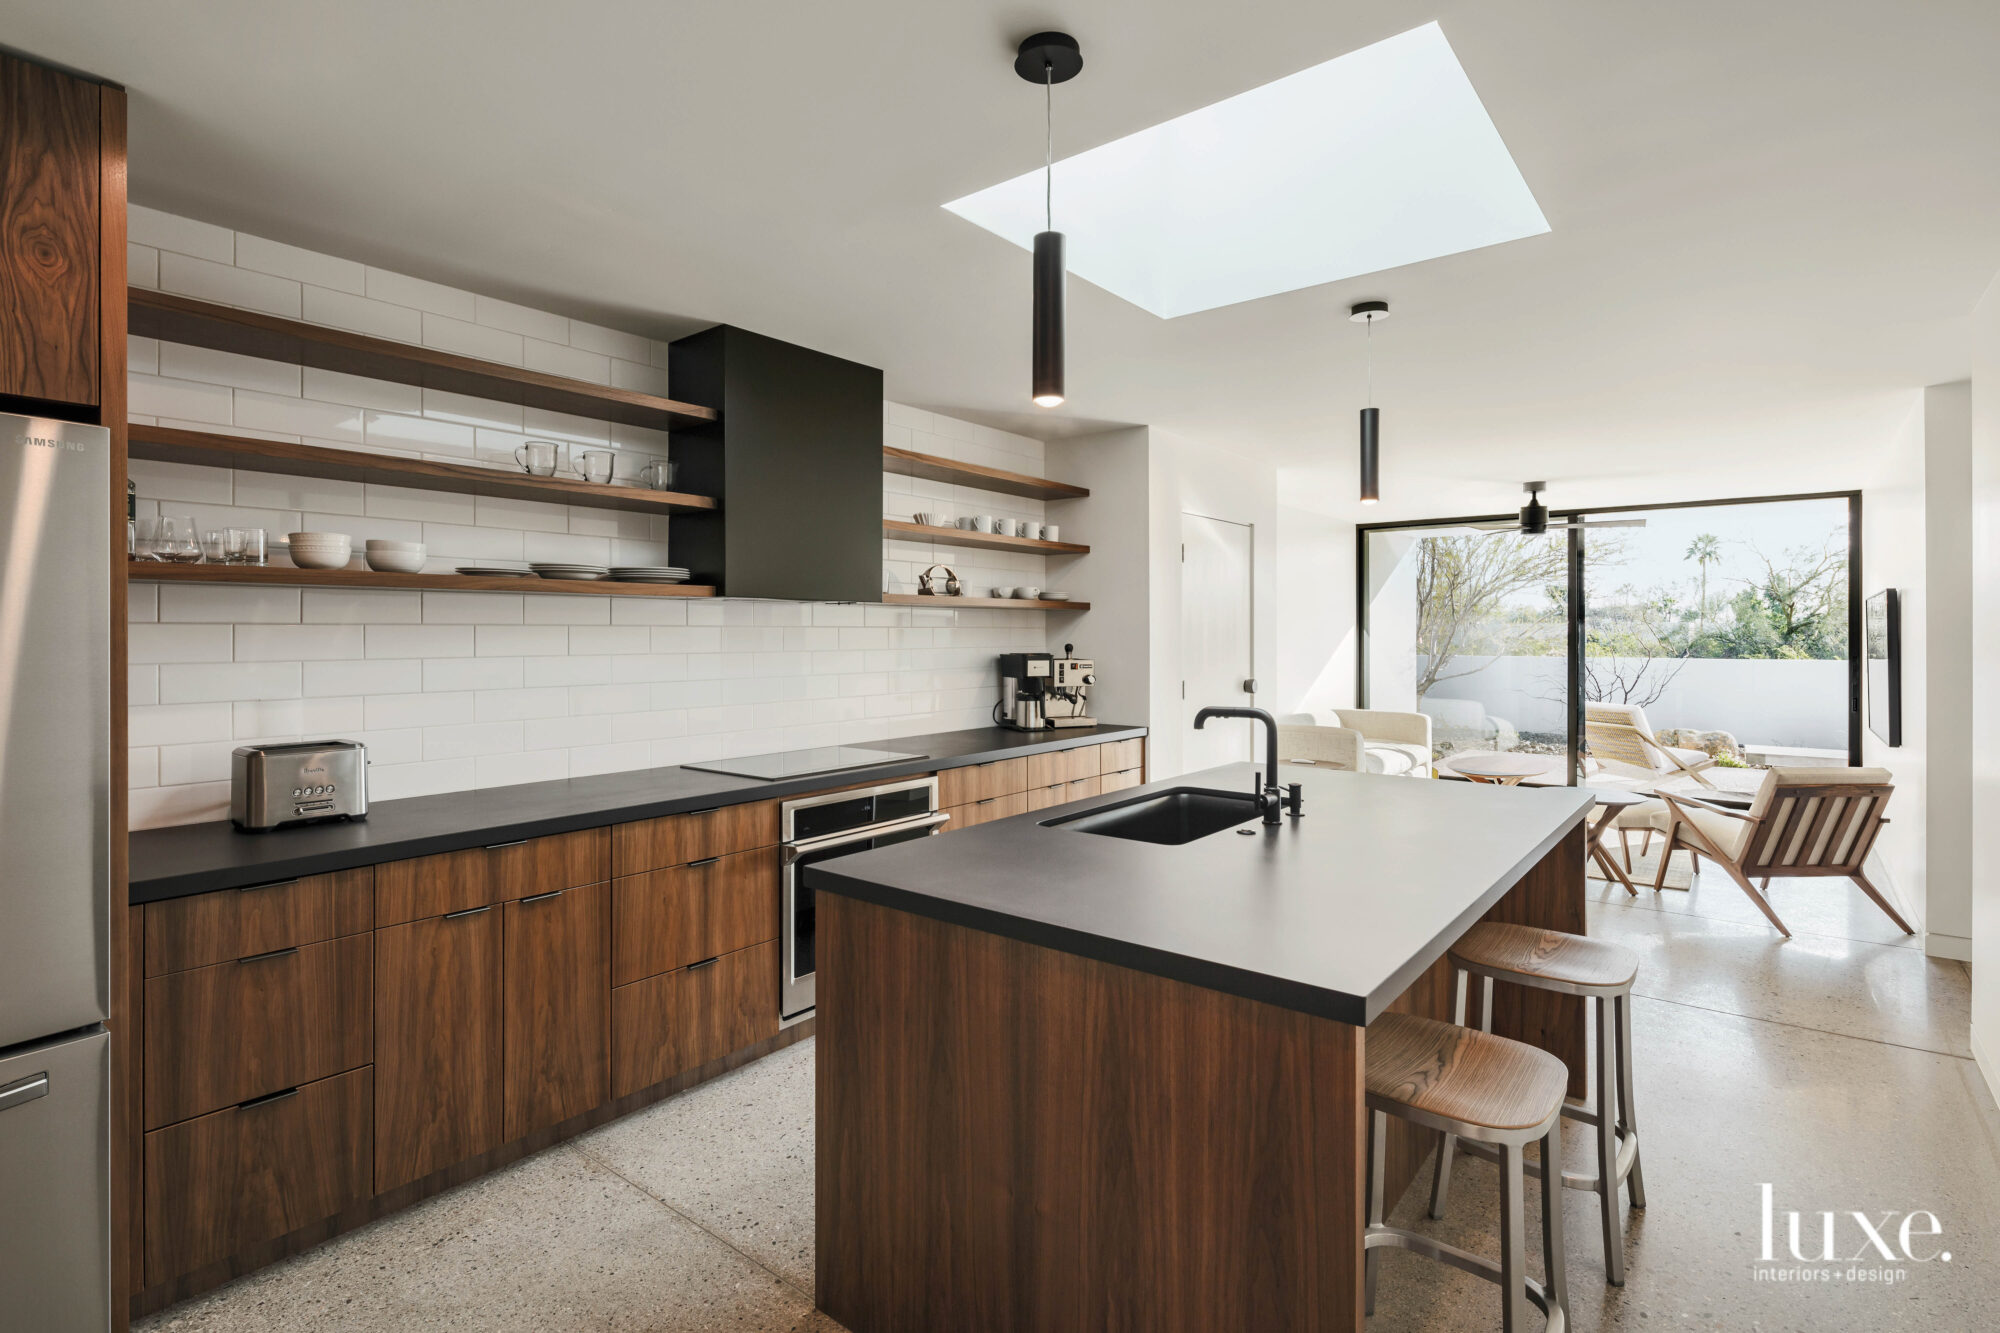 The guesthouse kitchen has matte black countertops with wood bases.